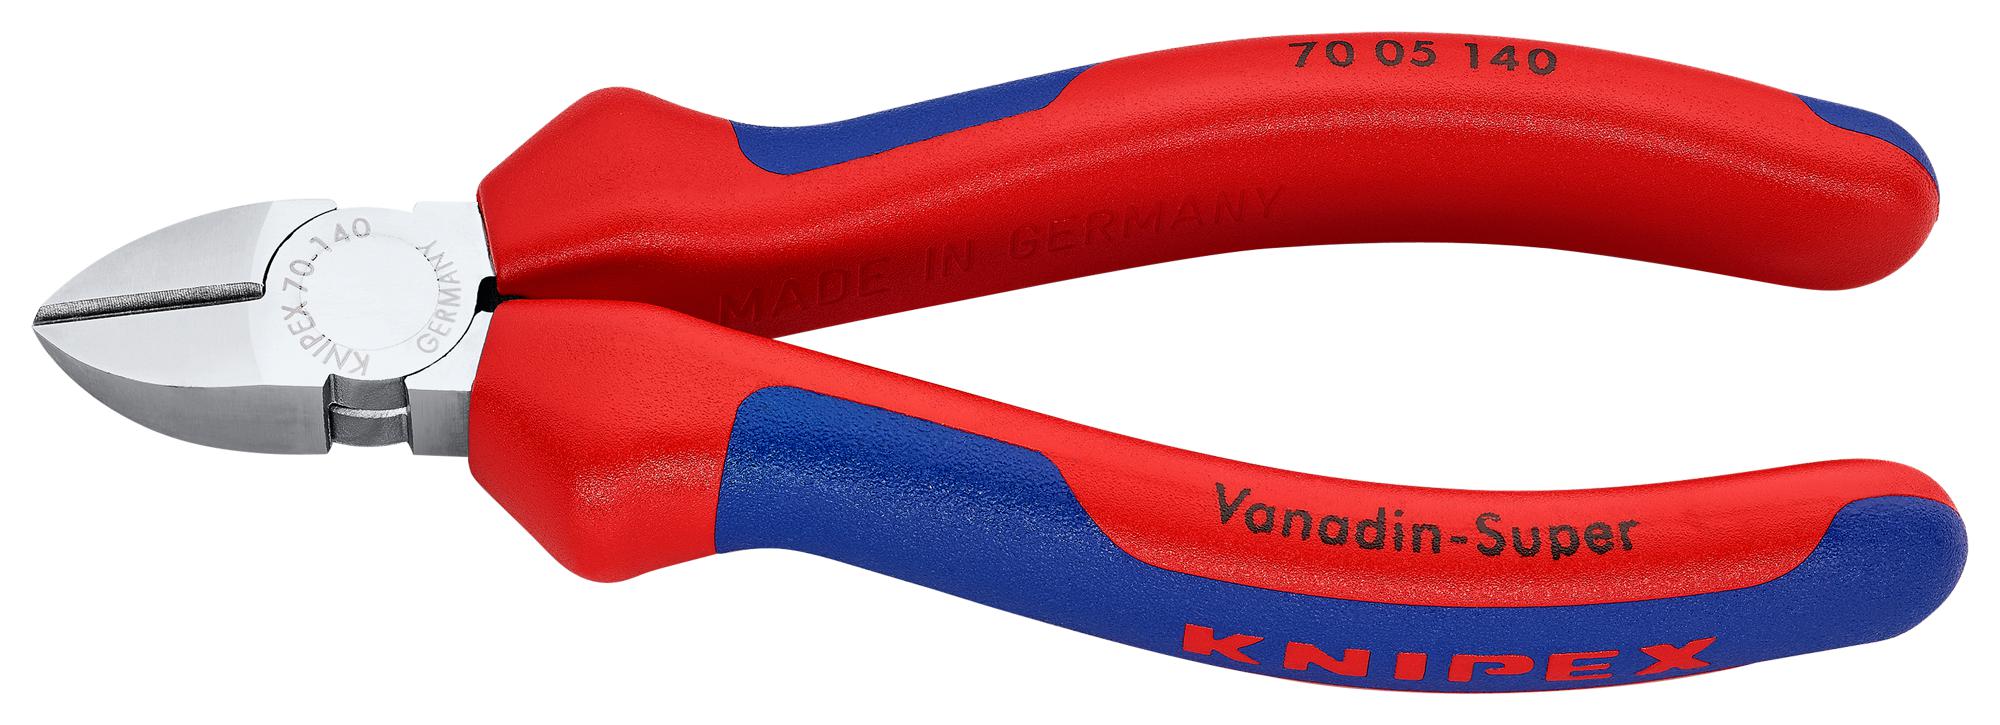 Knipex 70 05 140 Cutter, Side, 140mm